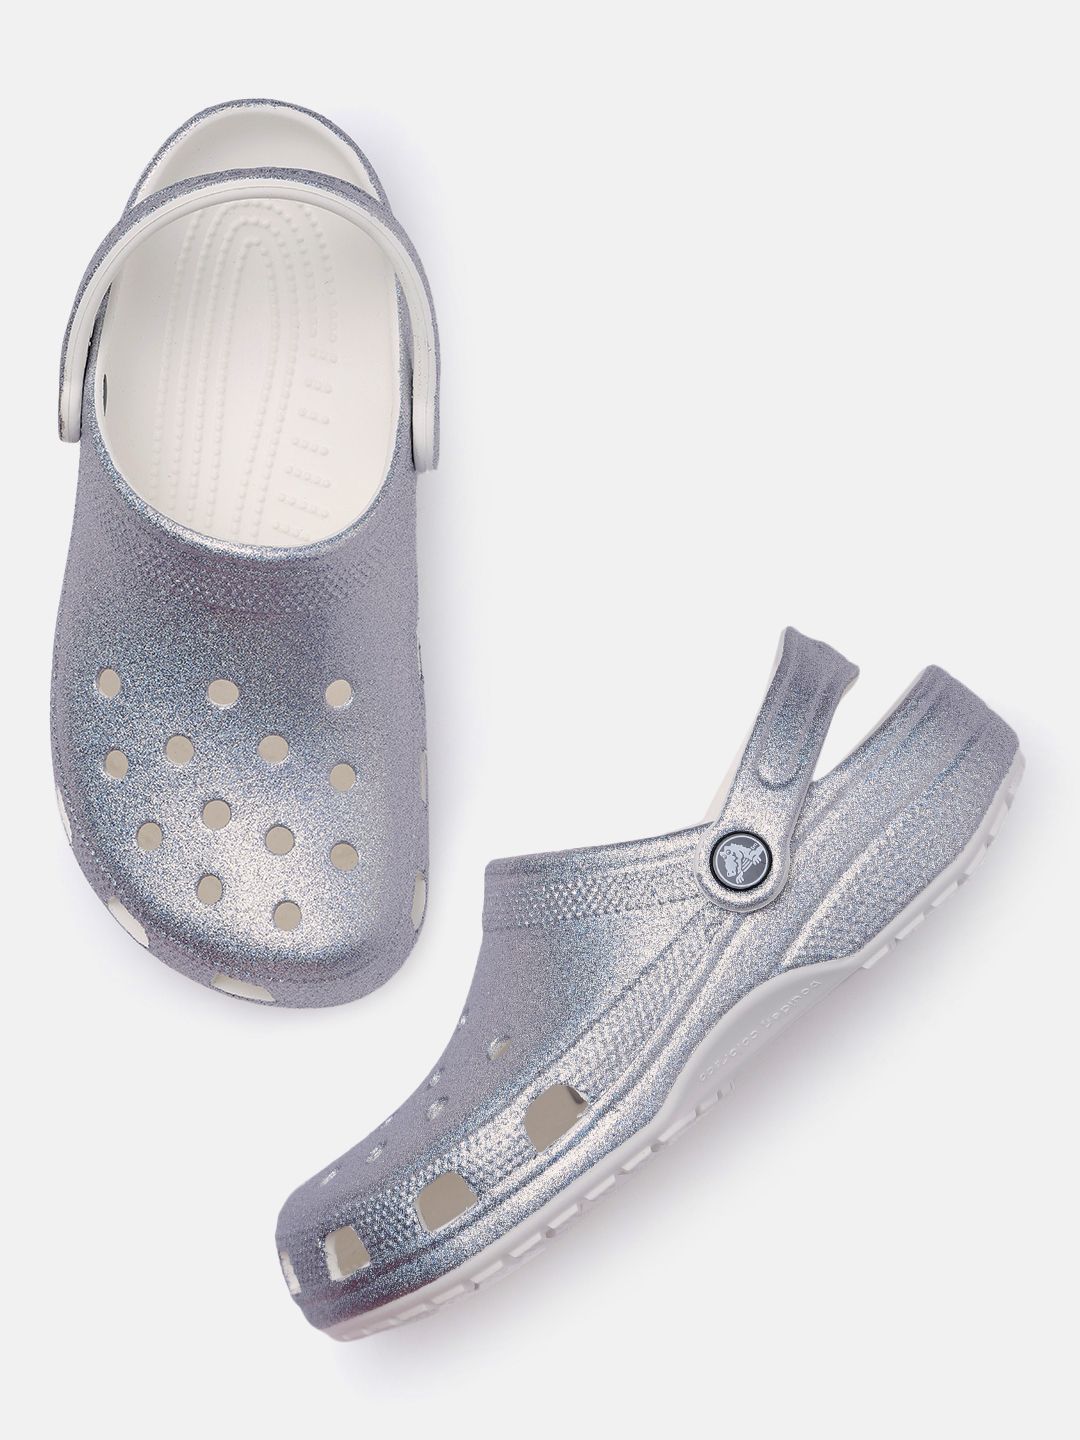 Crocs Unisex Silver-Toned Glitter Embellished Clogs Price in India